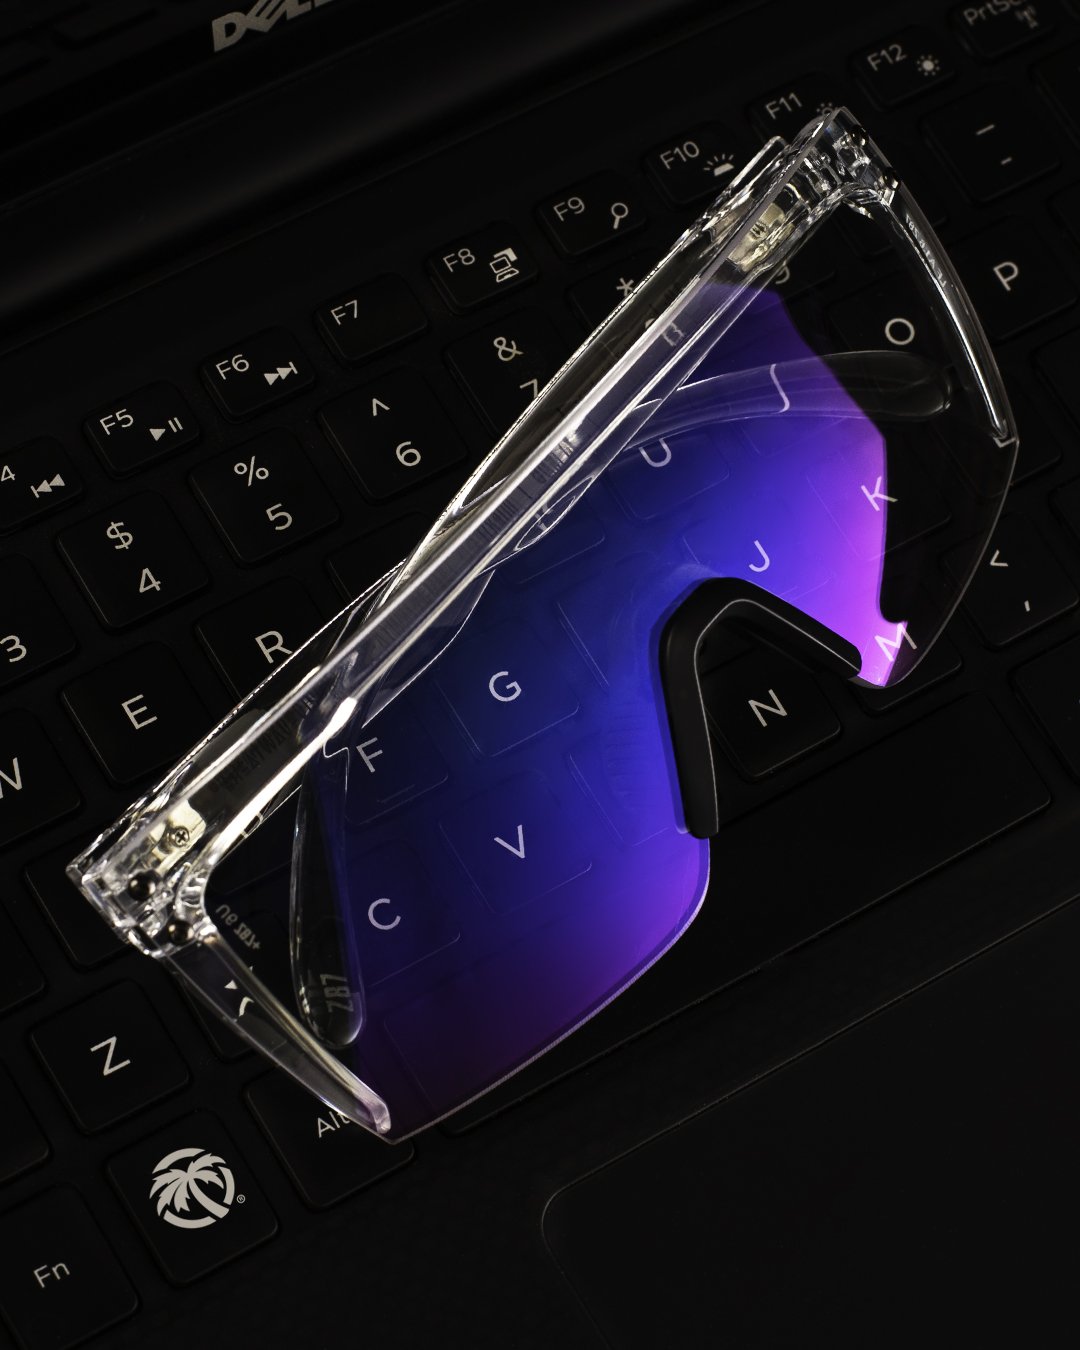 Heat Wave Visual Lazer Face Z87 Sunglasses with clear frame, black nose piece and clear blue blocker on top of a laptop keyboard. 